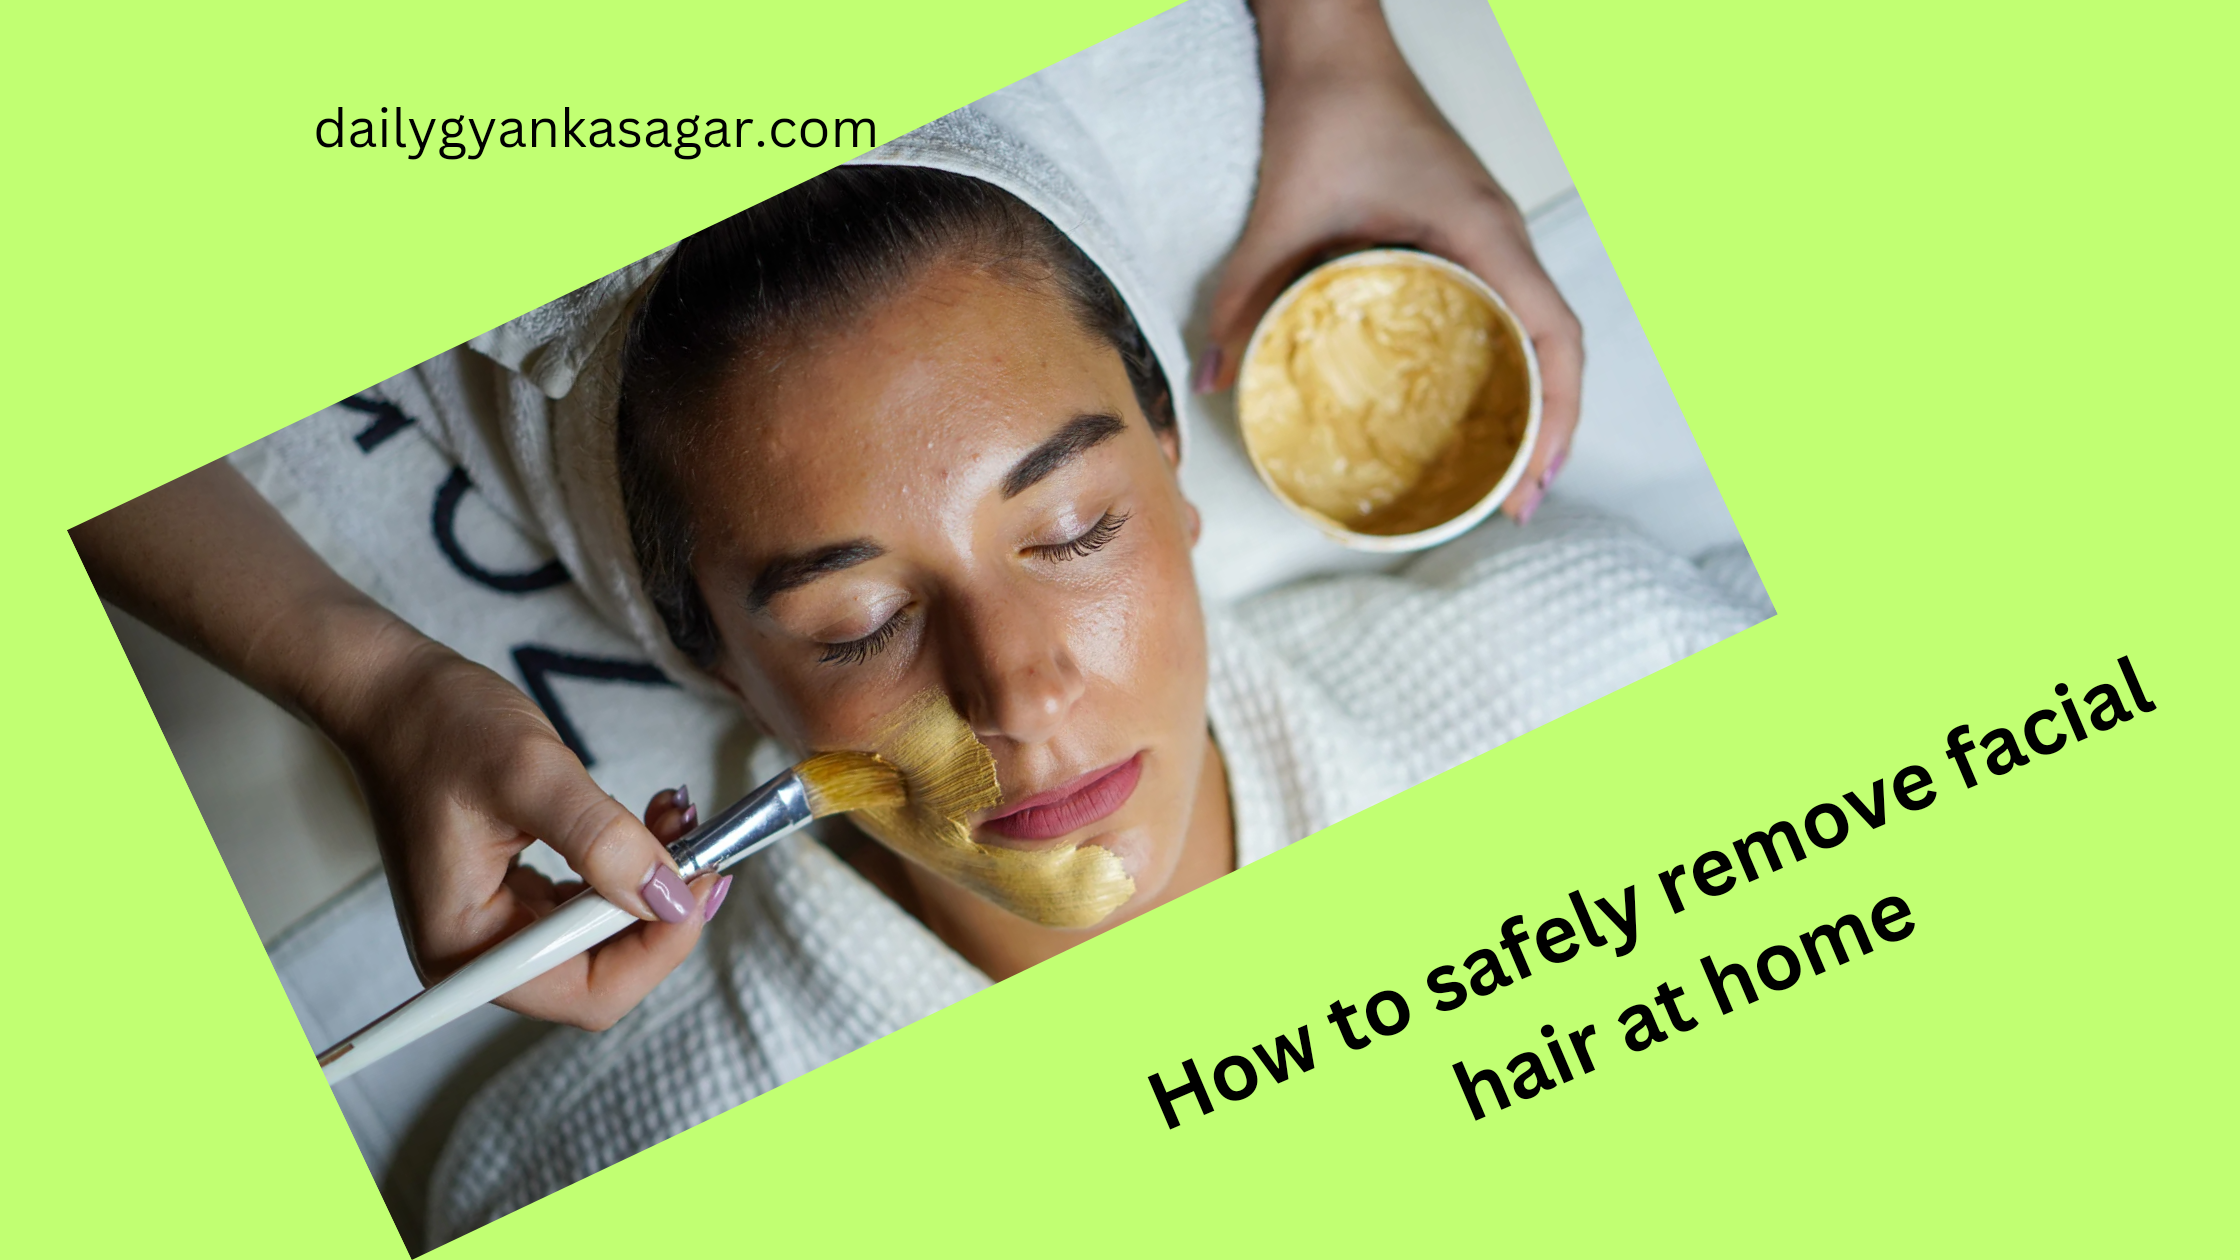 How to safely remove facial hair at home